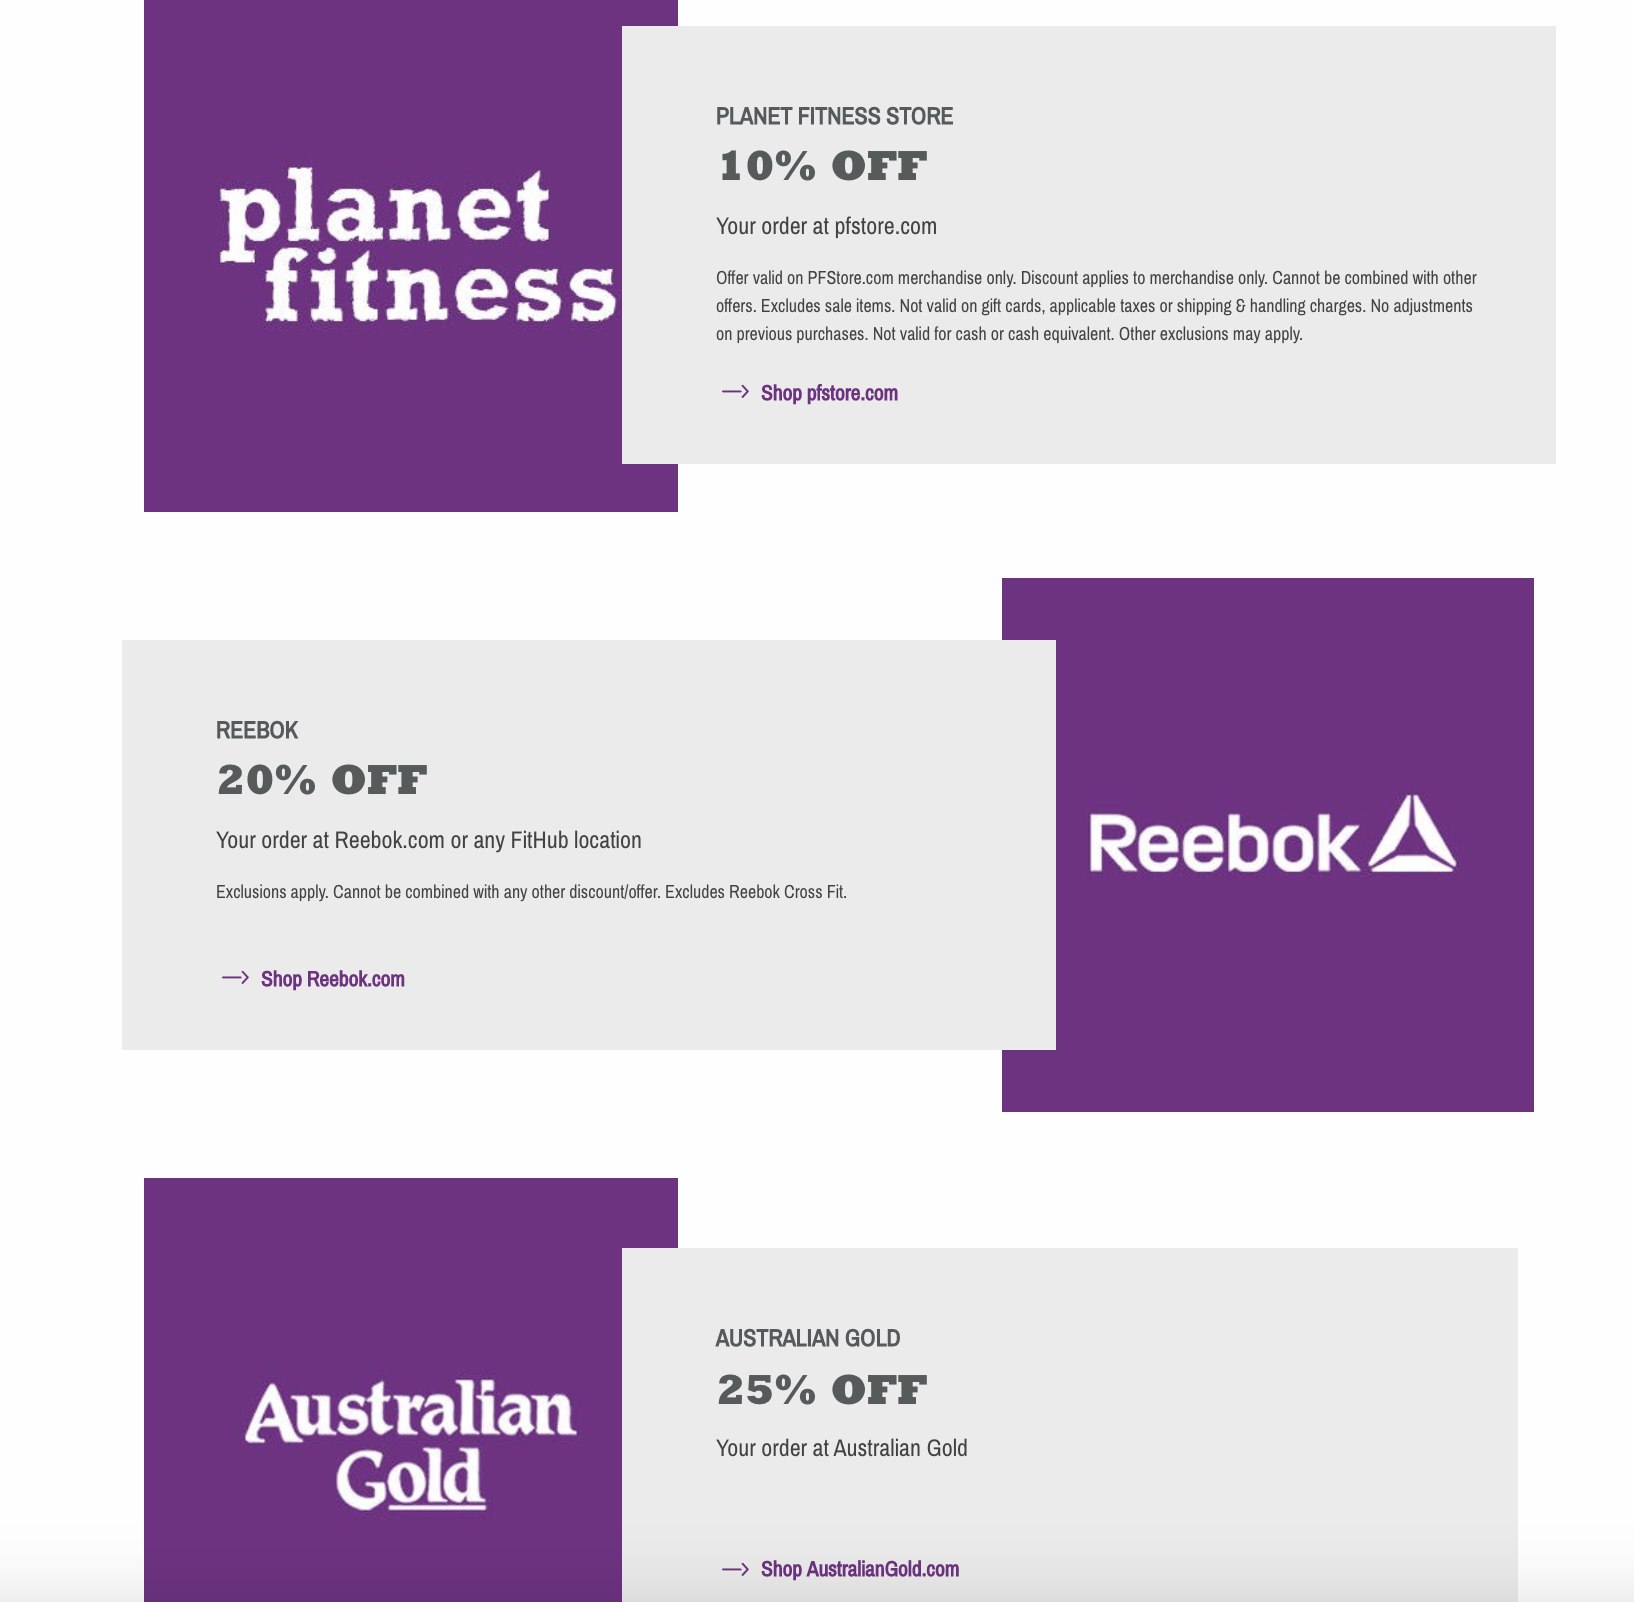 reebok discount with planet fitness